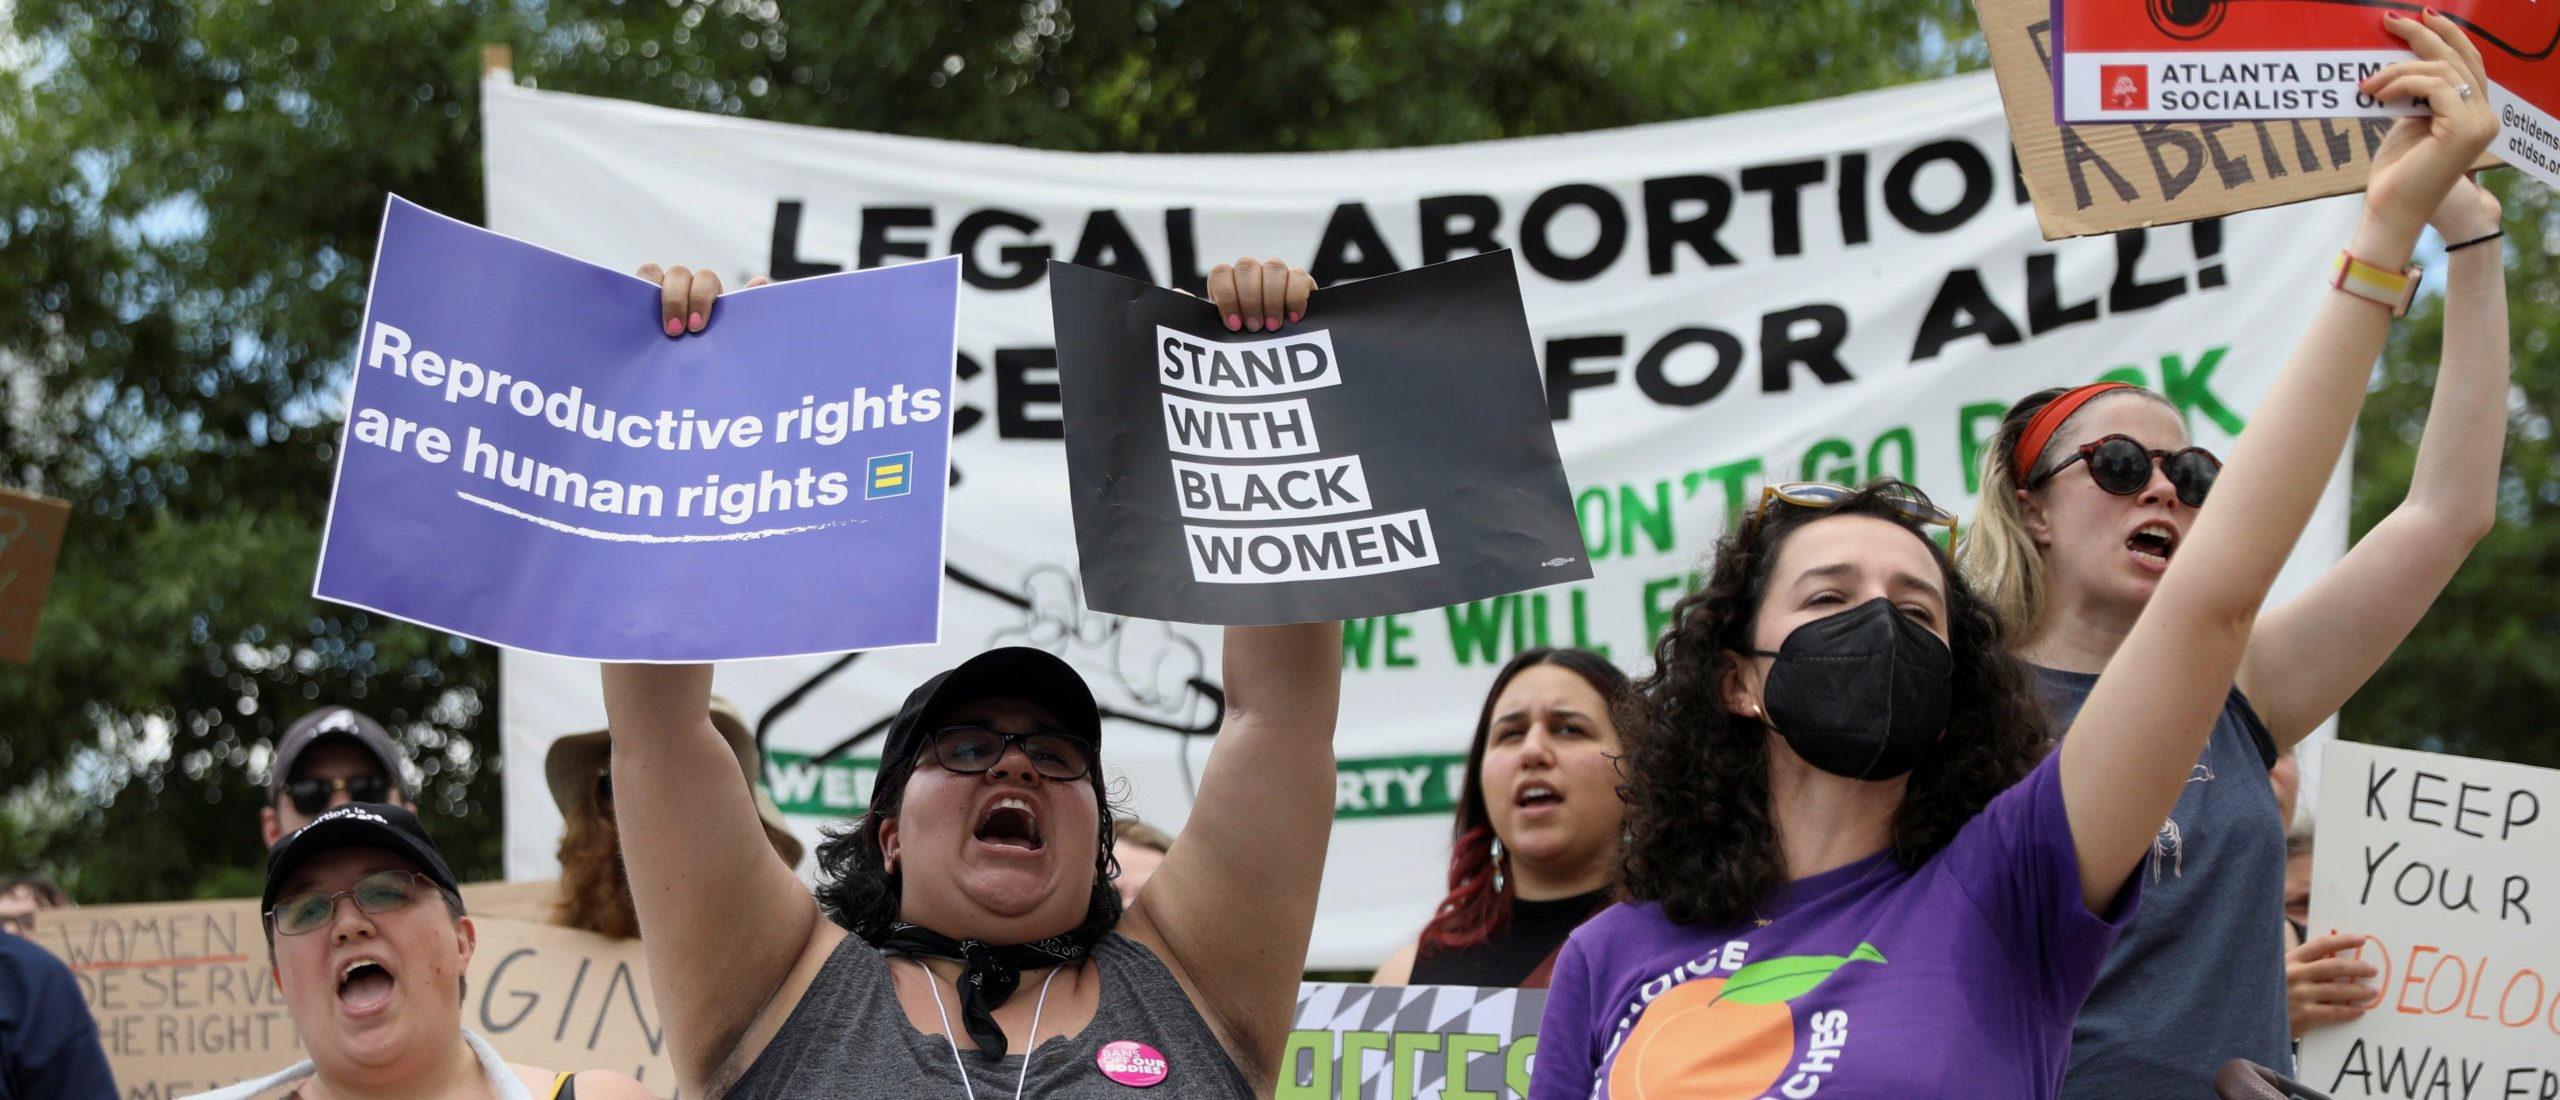 Abortion rights protesters participate in nationwide demonstrations following the leaked Supreme Court opinion suggesting the possibility of overturning the Roe v. Wade abortion rights decision, in Atlanta, Georgia, U.S., May 14, 2022.